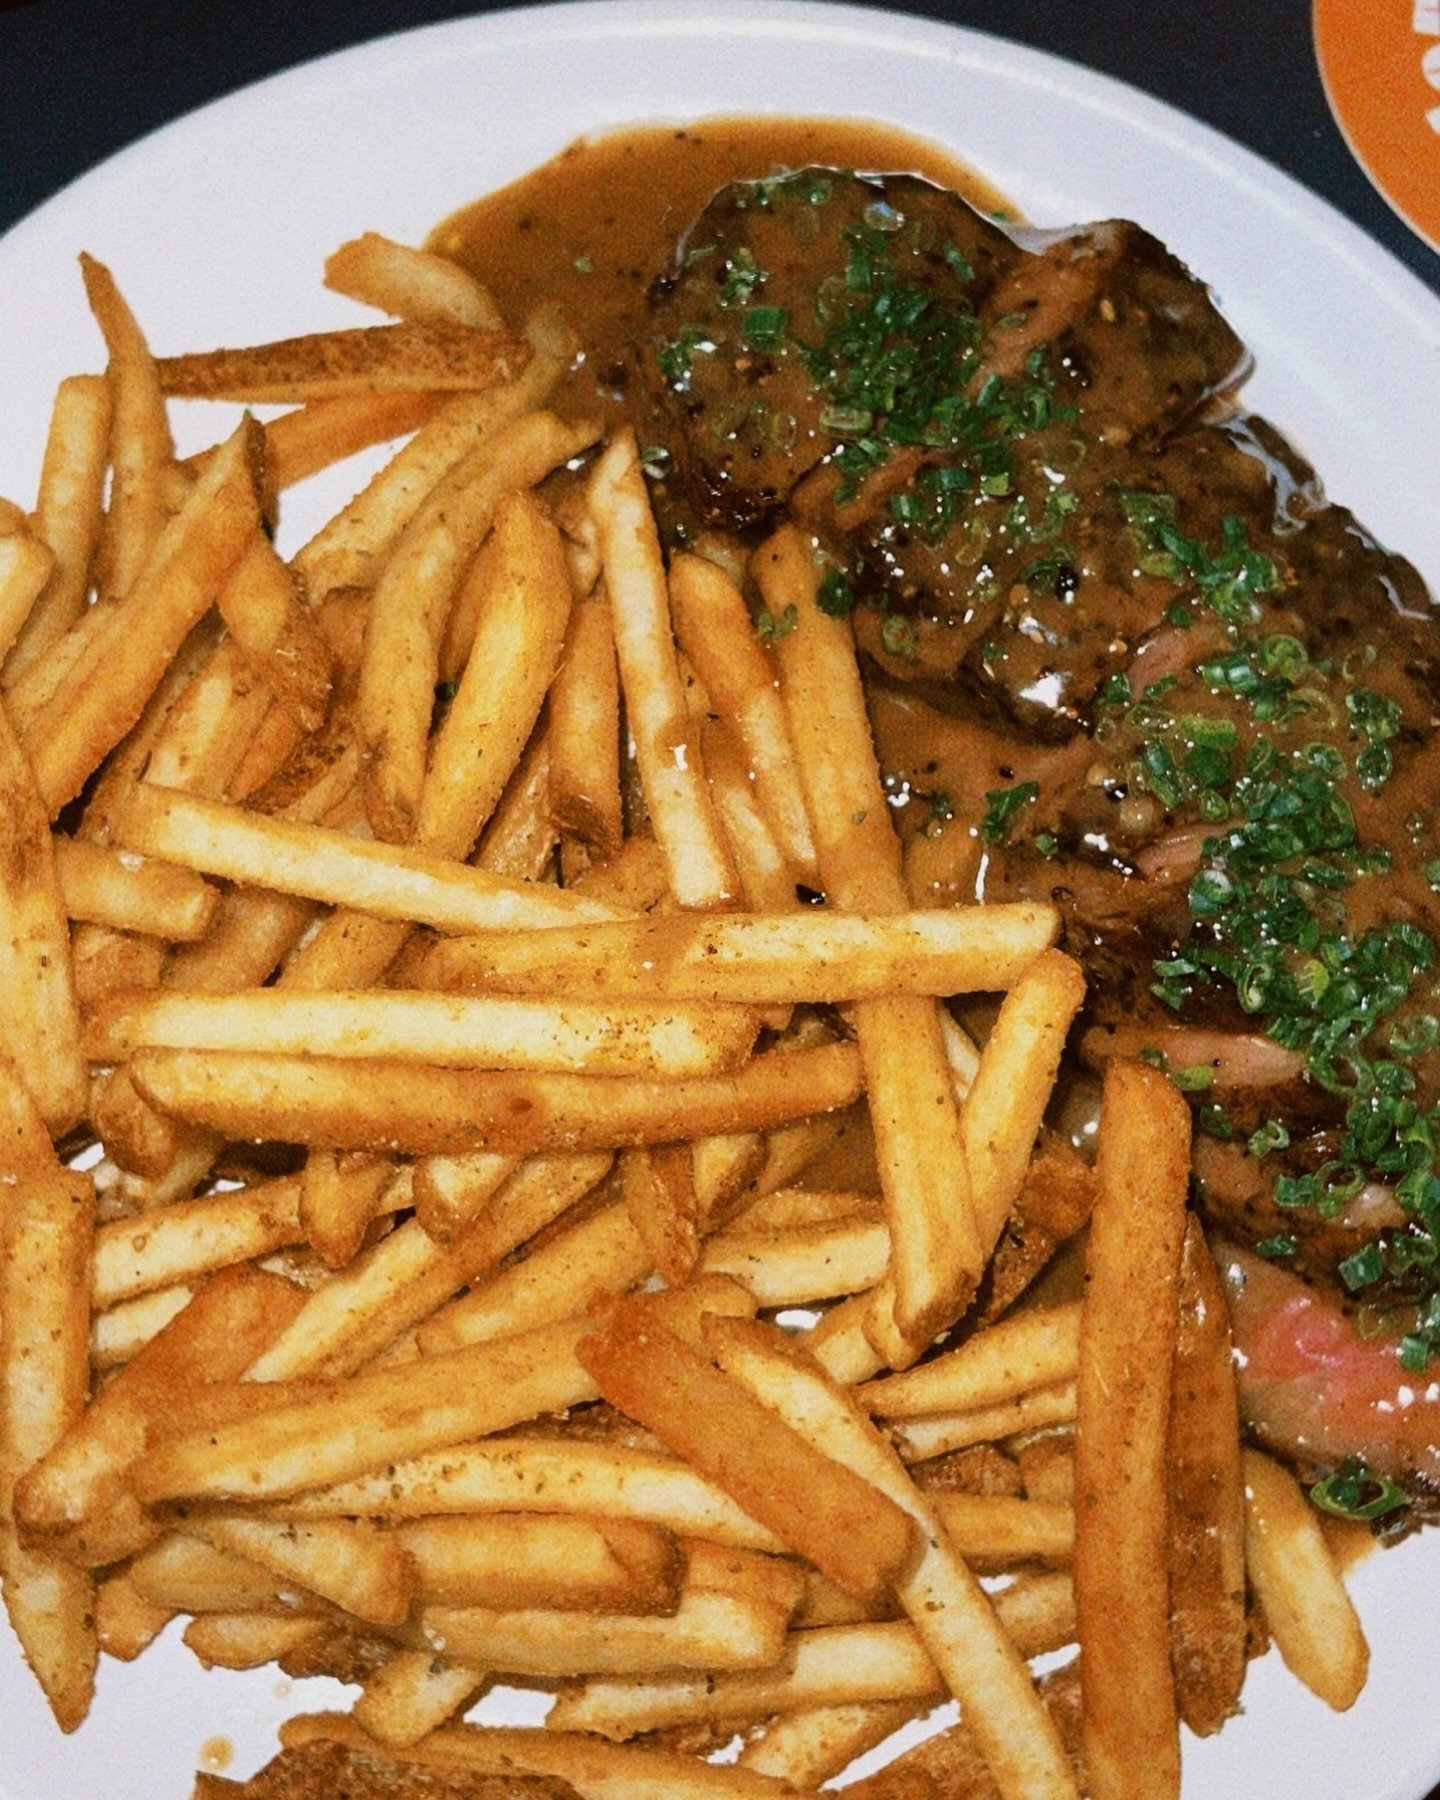 It&rsquo;s starting to feel like Steak Frites weather ⛈️ Available from 4pm when doors open 🍷